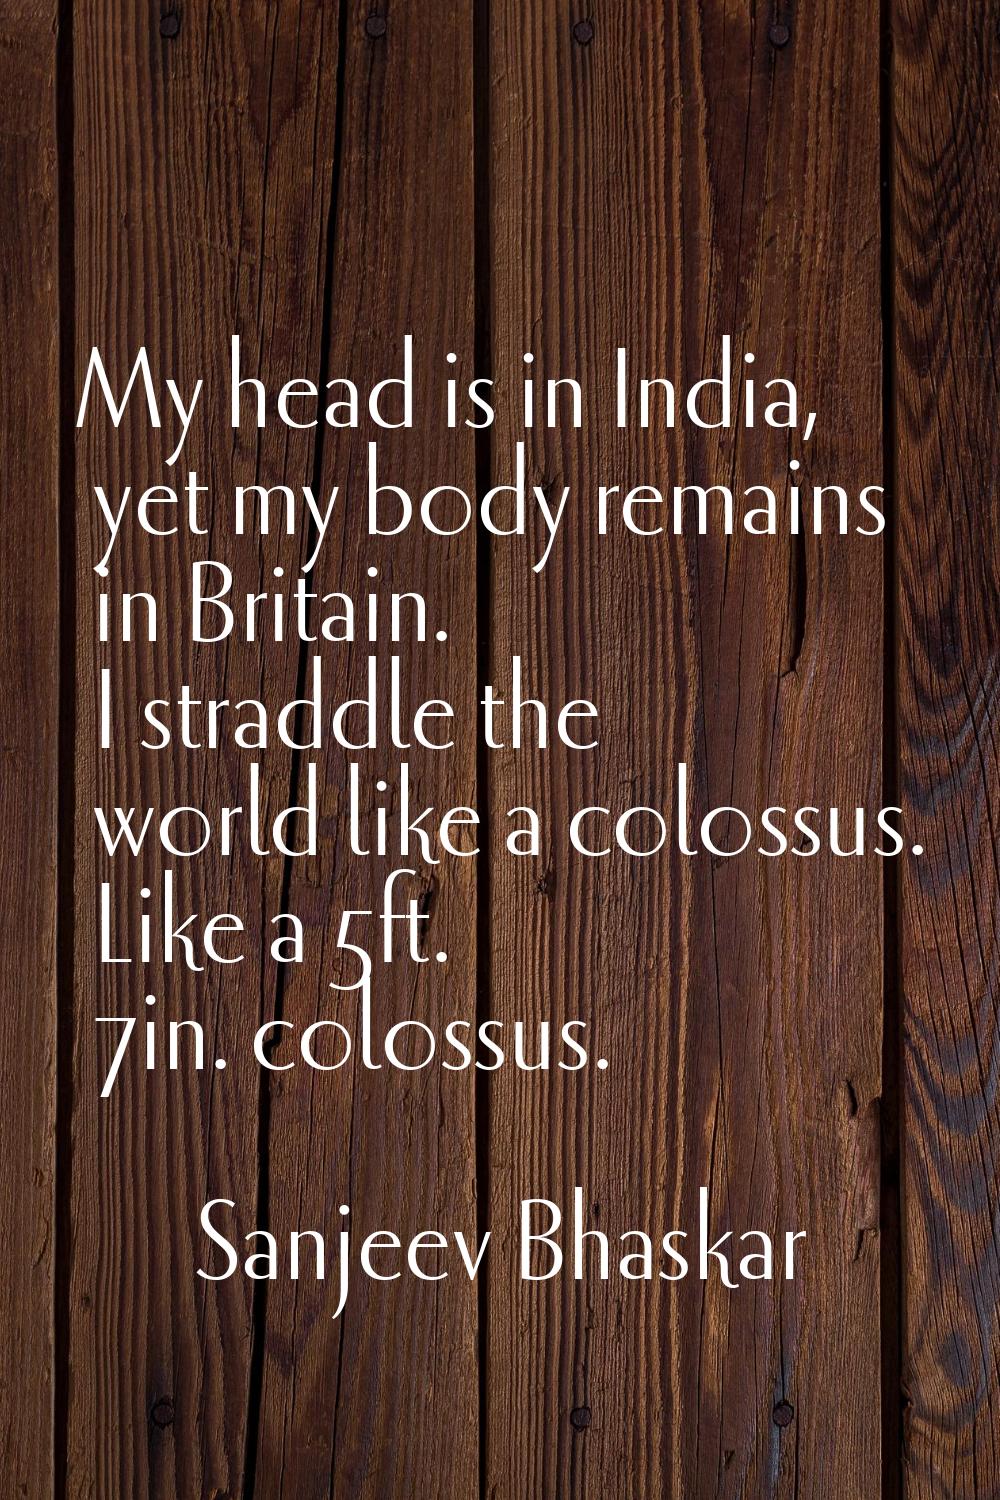 My head is in India, yet my body remains in Britain. I straddle the world like a colossus. Like a 5